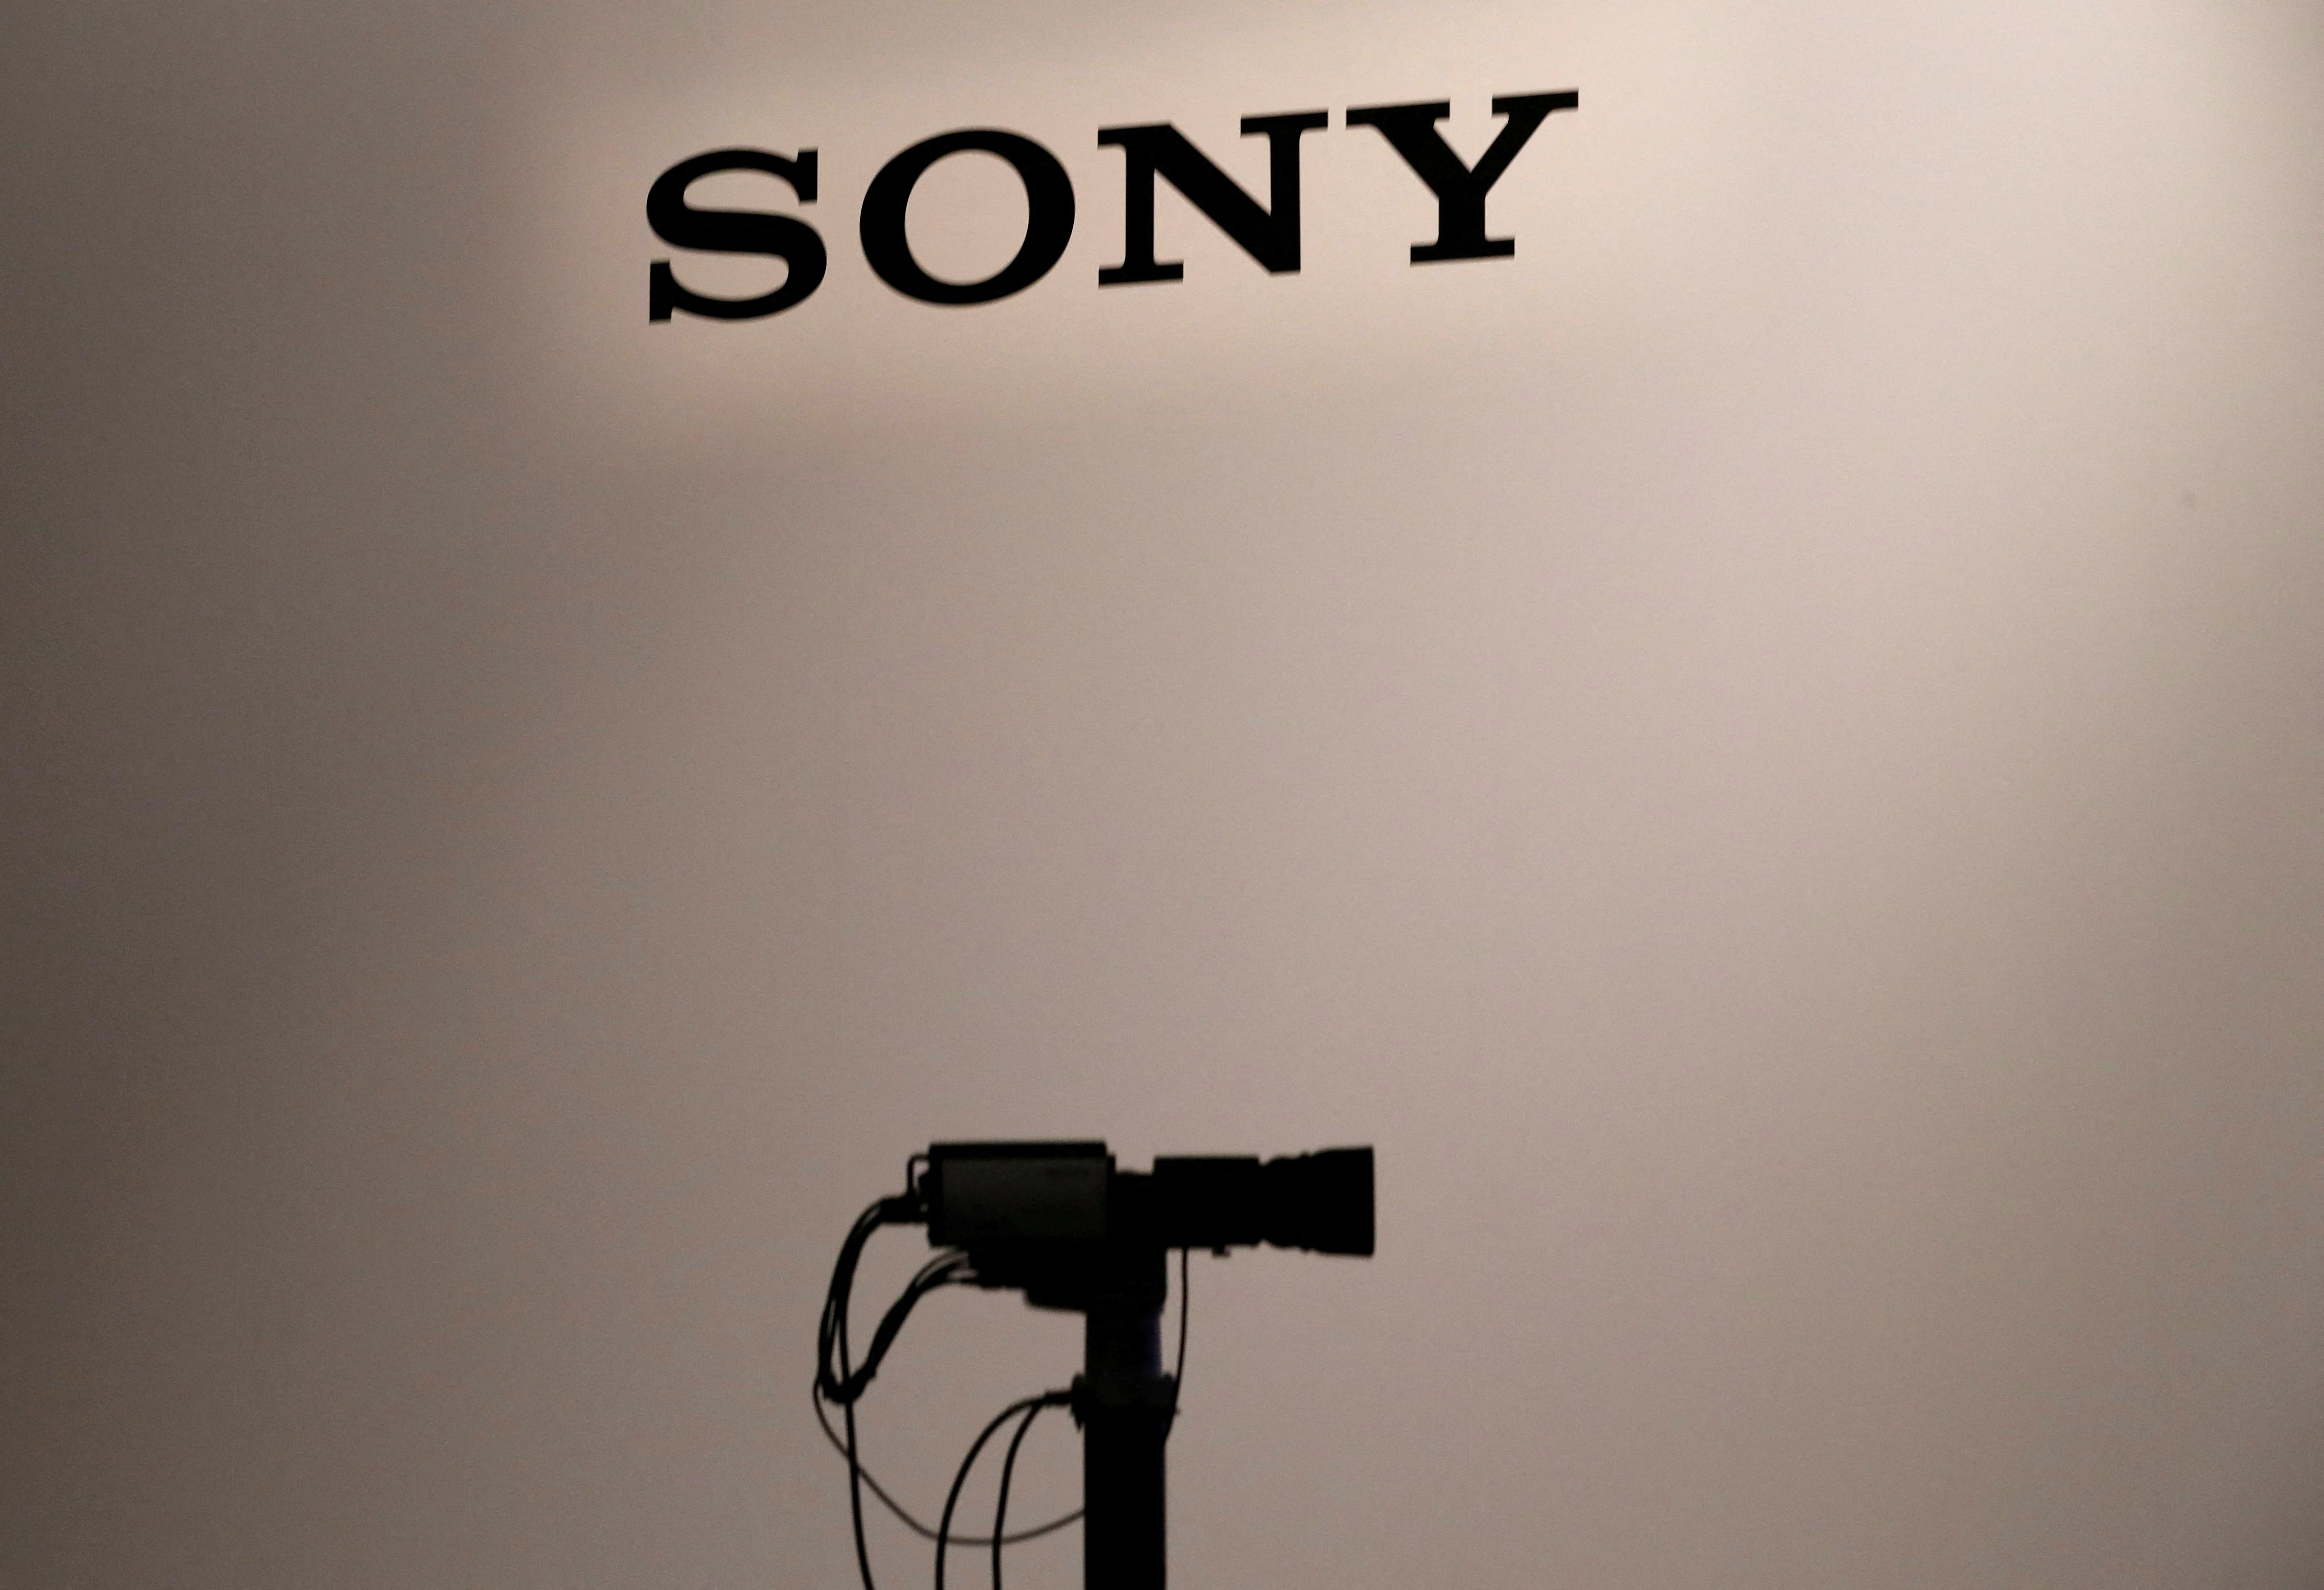 Sony Corp's logo is seen at its news conference in Tokyo